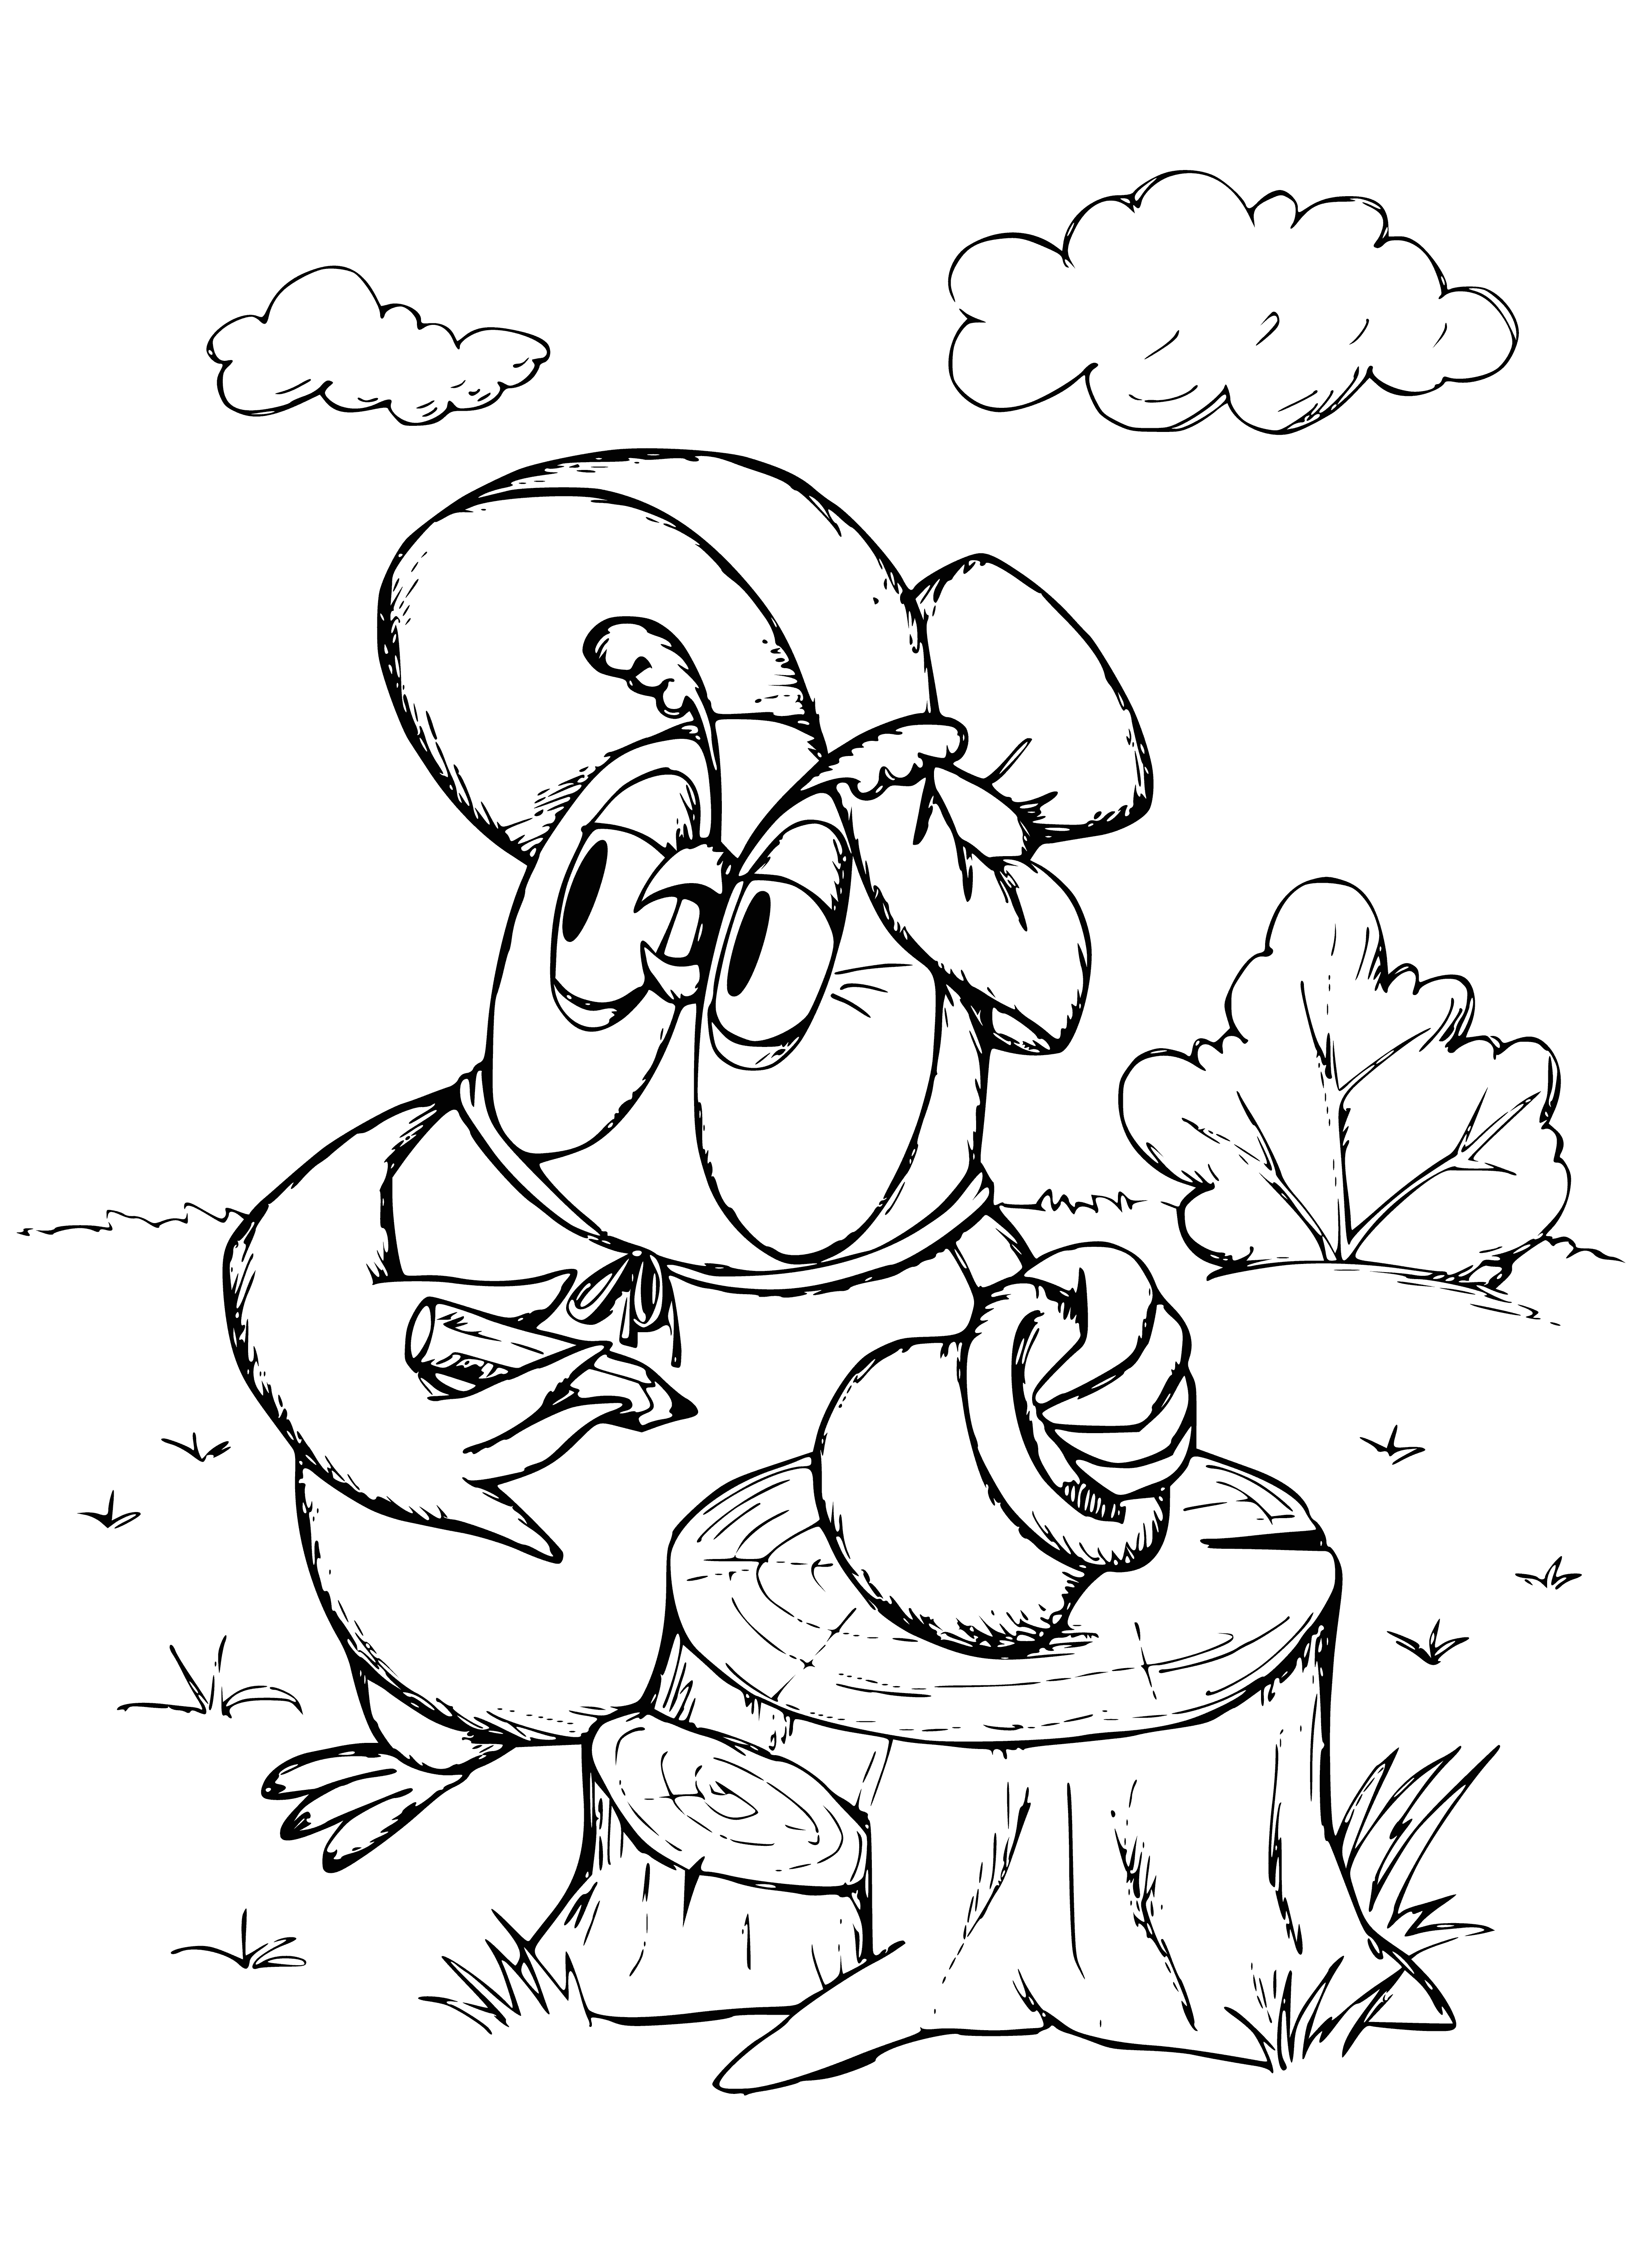 coloring page: An old tree with a bear in a red shirt and a large black and white bird with a long beak makes a beautiful scene! #coloringbook